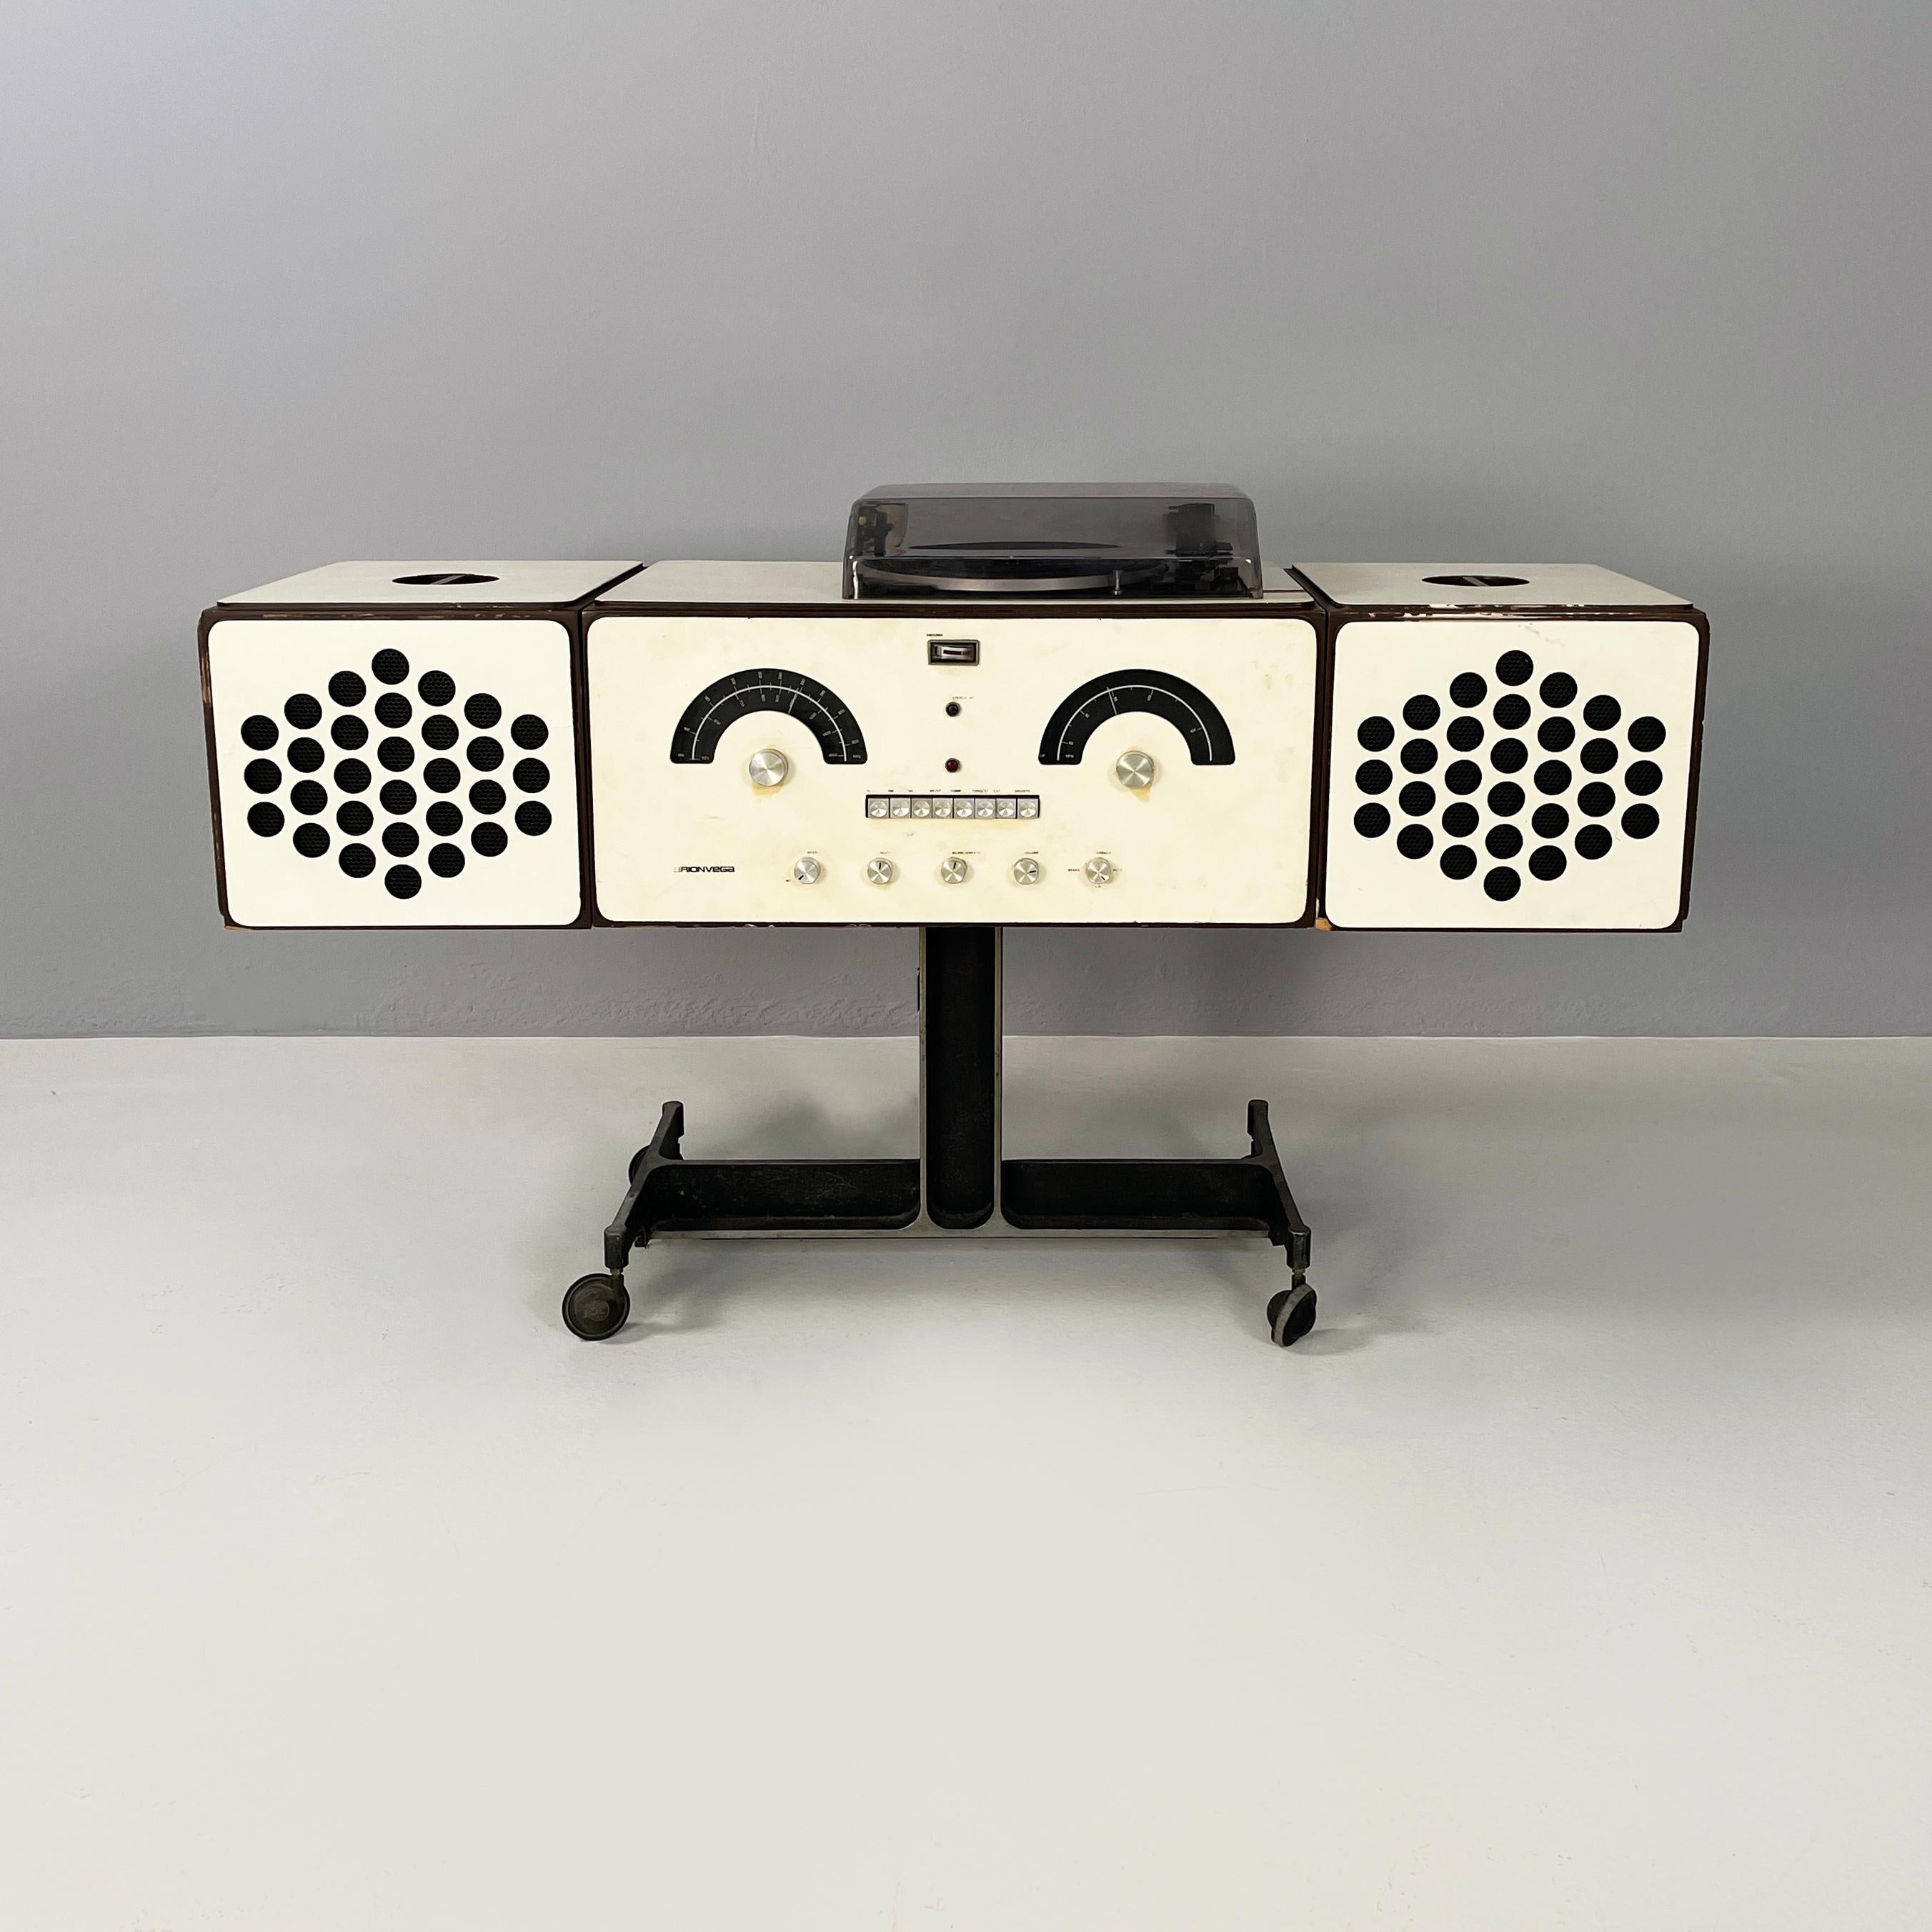 Italian mid-century modern Radio phonograph and record player RR126 by Achille and Pier Giacomo Castiglioni for Brionvega, 1960s
Radio phonograph and record player mod. RR126 with rectangular base in white-ivory painted wood with dark brown